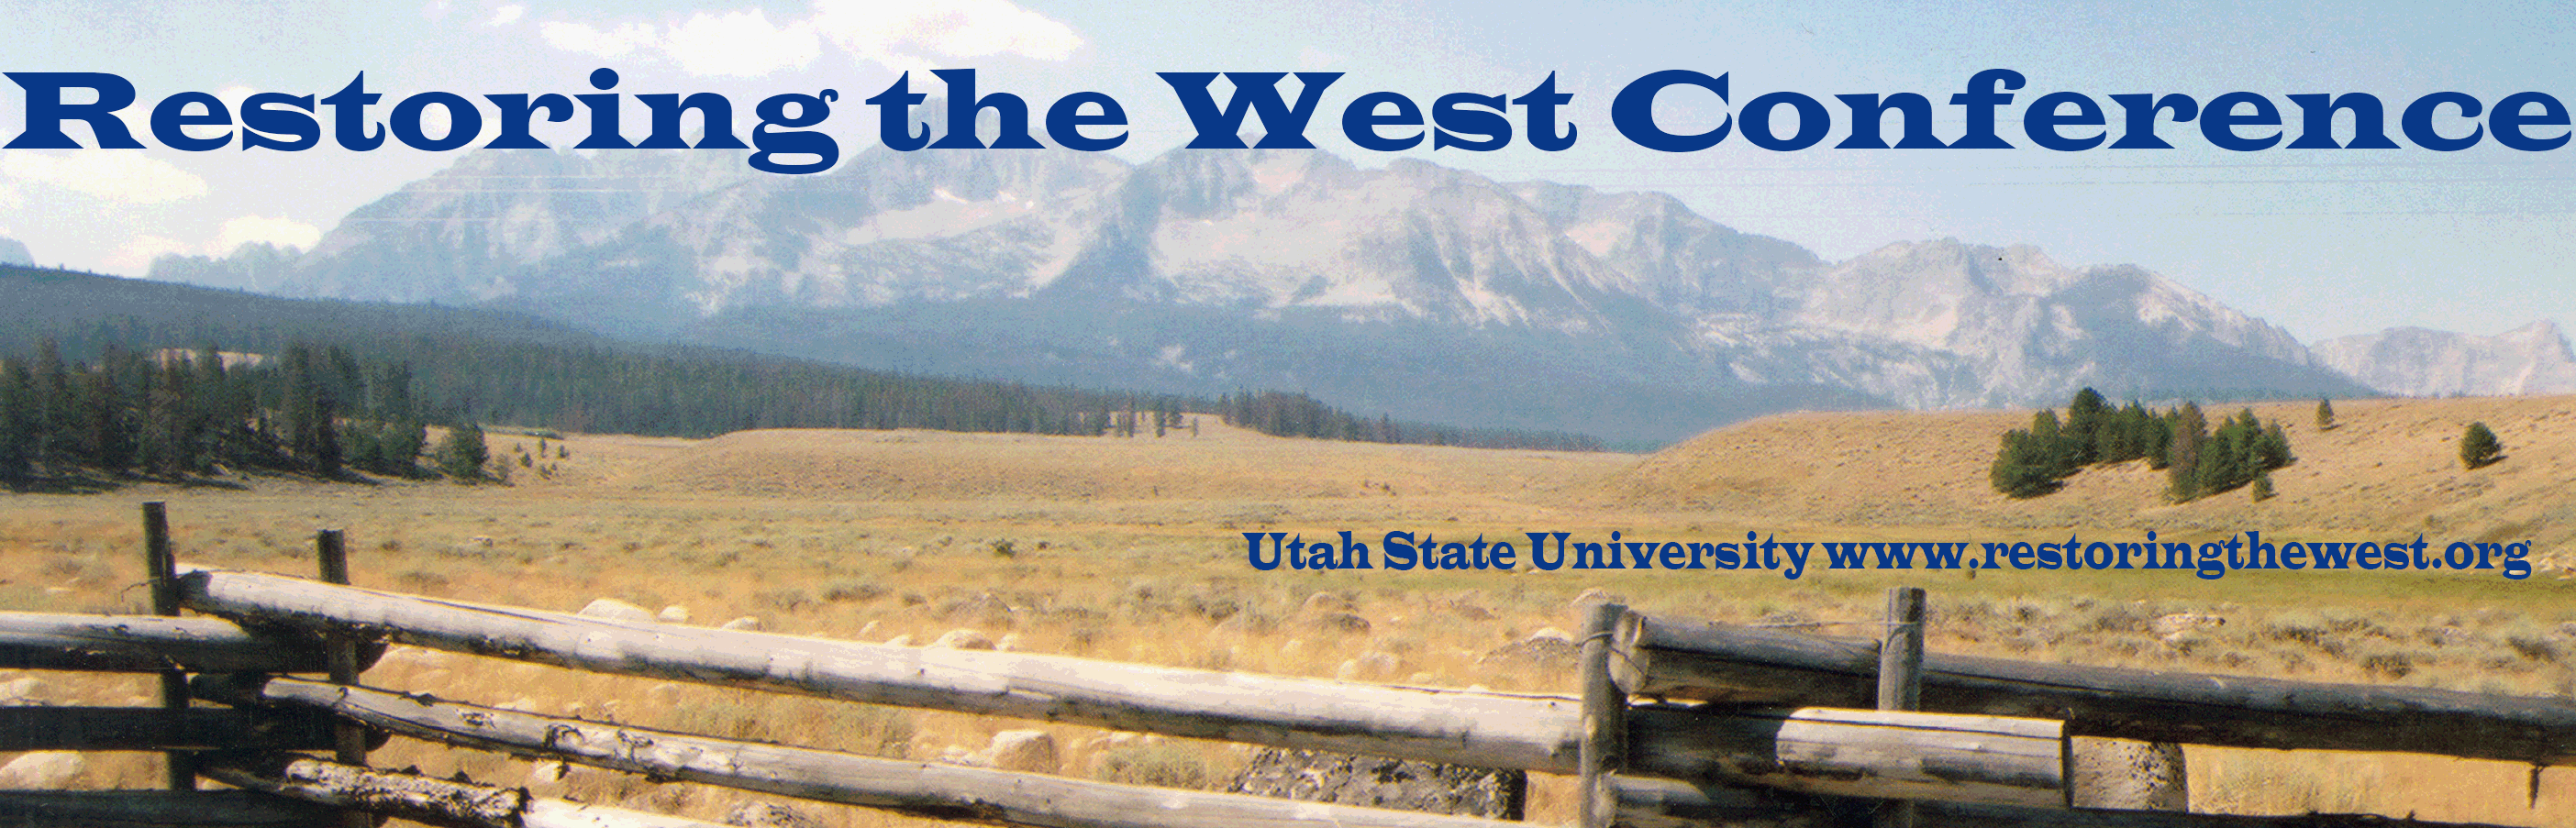 Restoring the West Conference